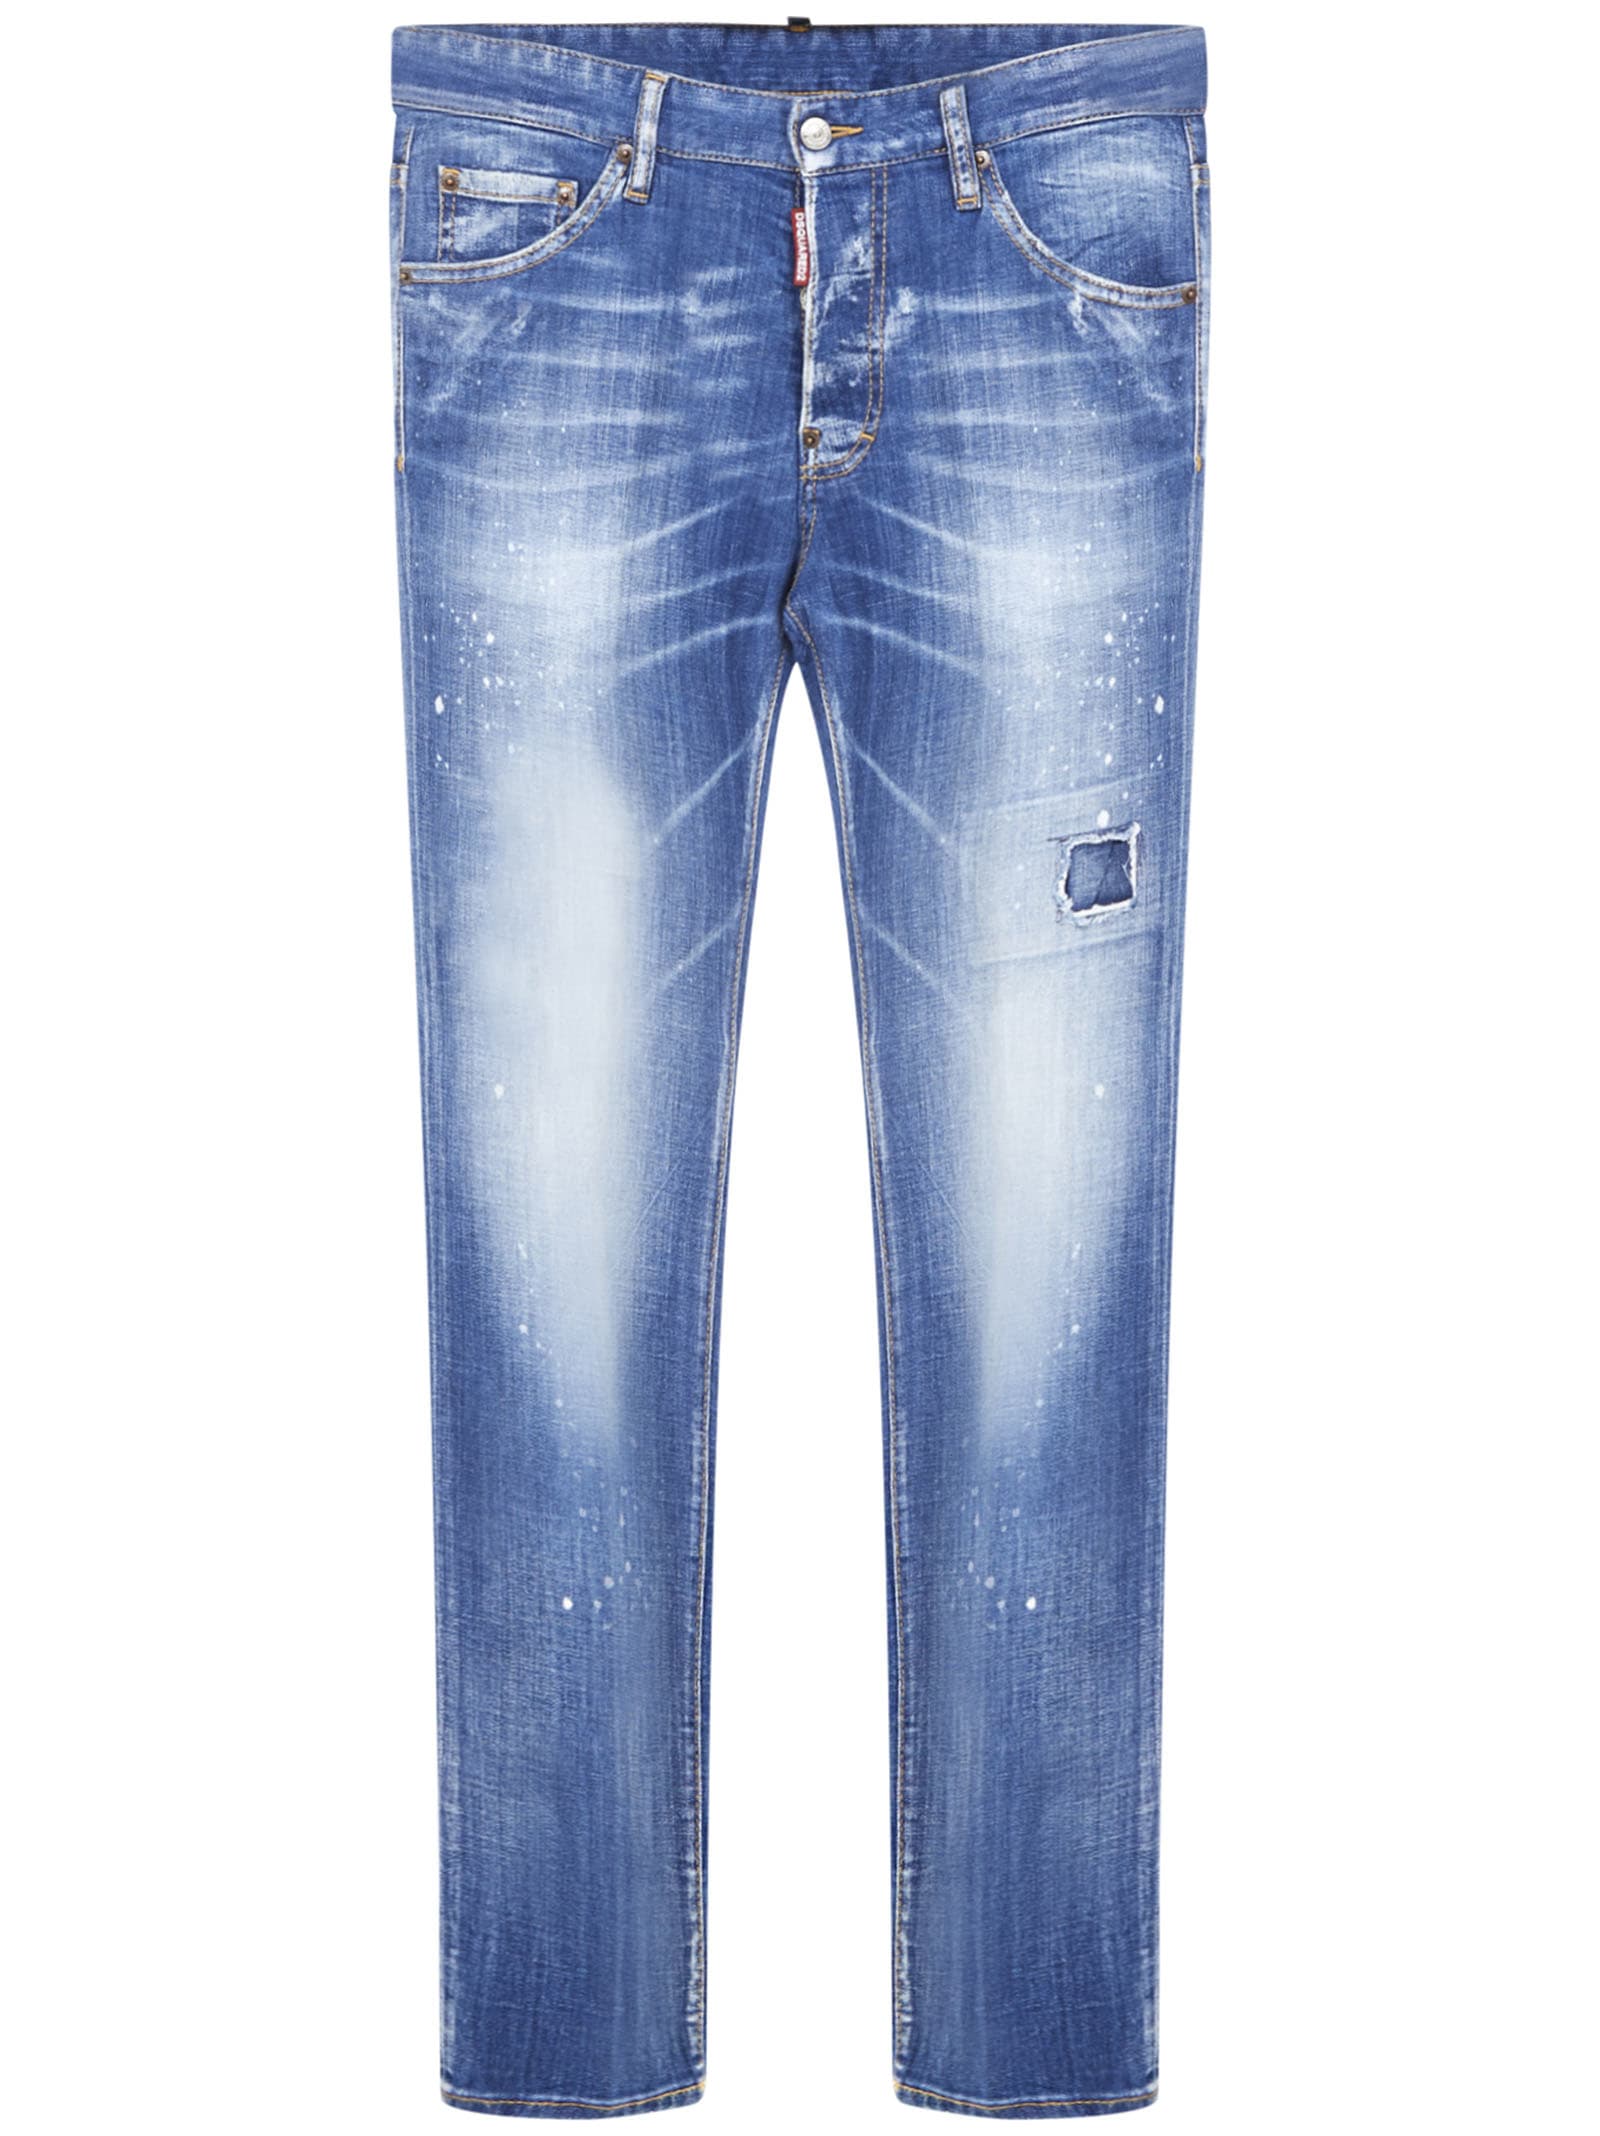 dsquared2 jeans clothing sale